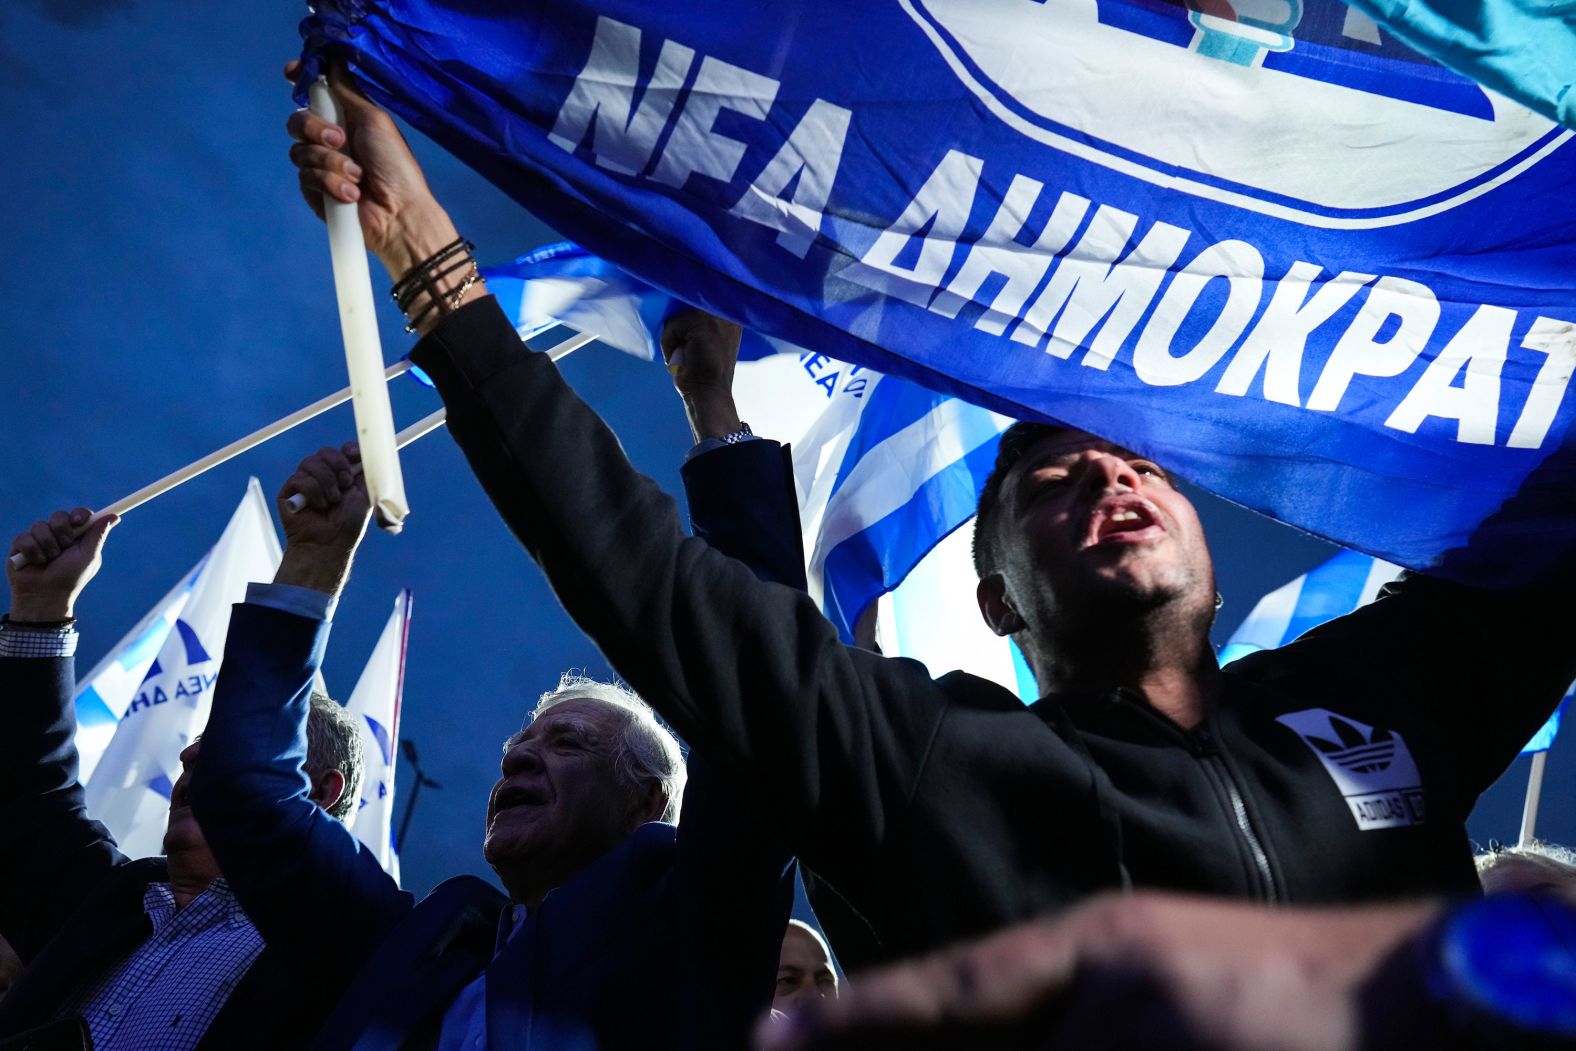 Supporters of Greek Prime Minister Kyriakos Mitsotakis shout slogans outside his party's headquarters in Athens on Sunday, May 21. The ruling New Democracy party <a href="index.php?page=&url=https%3A%2F%2Fwww.cnn.com%2F2023%2F05%2F22%2Feurope%2Fgreece-general-election-no-majority-intl%2Findex.html" target="_blank">scored a crushing victory in parliamentary elections Sunday</a> but fell short of winning an outright majority in a vote dominated by the cost-of-living crisis, a wiretapping scandal and anger over the country's deadliest train crash.